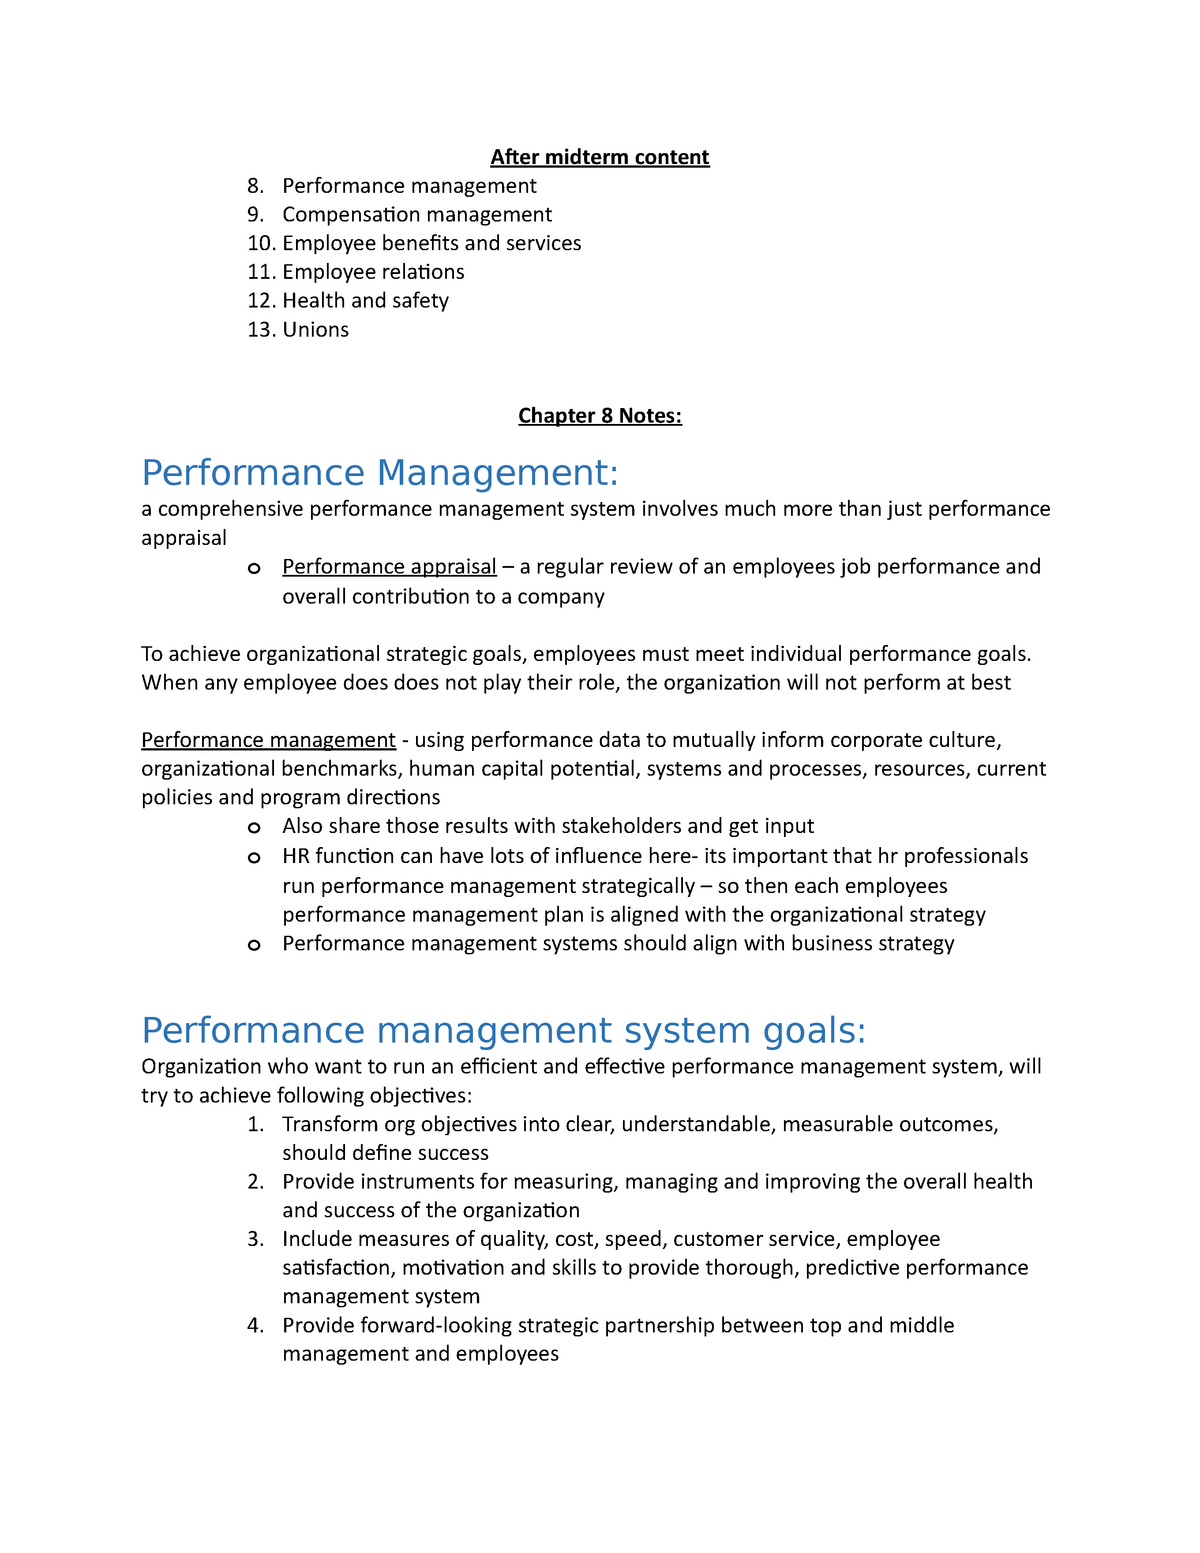 explain how employee performance is measured and managed